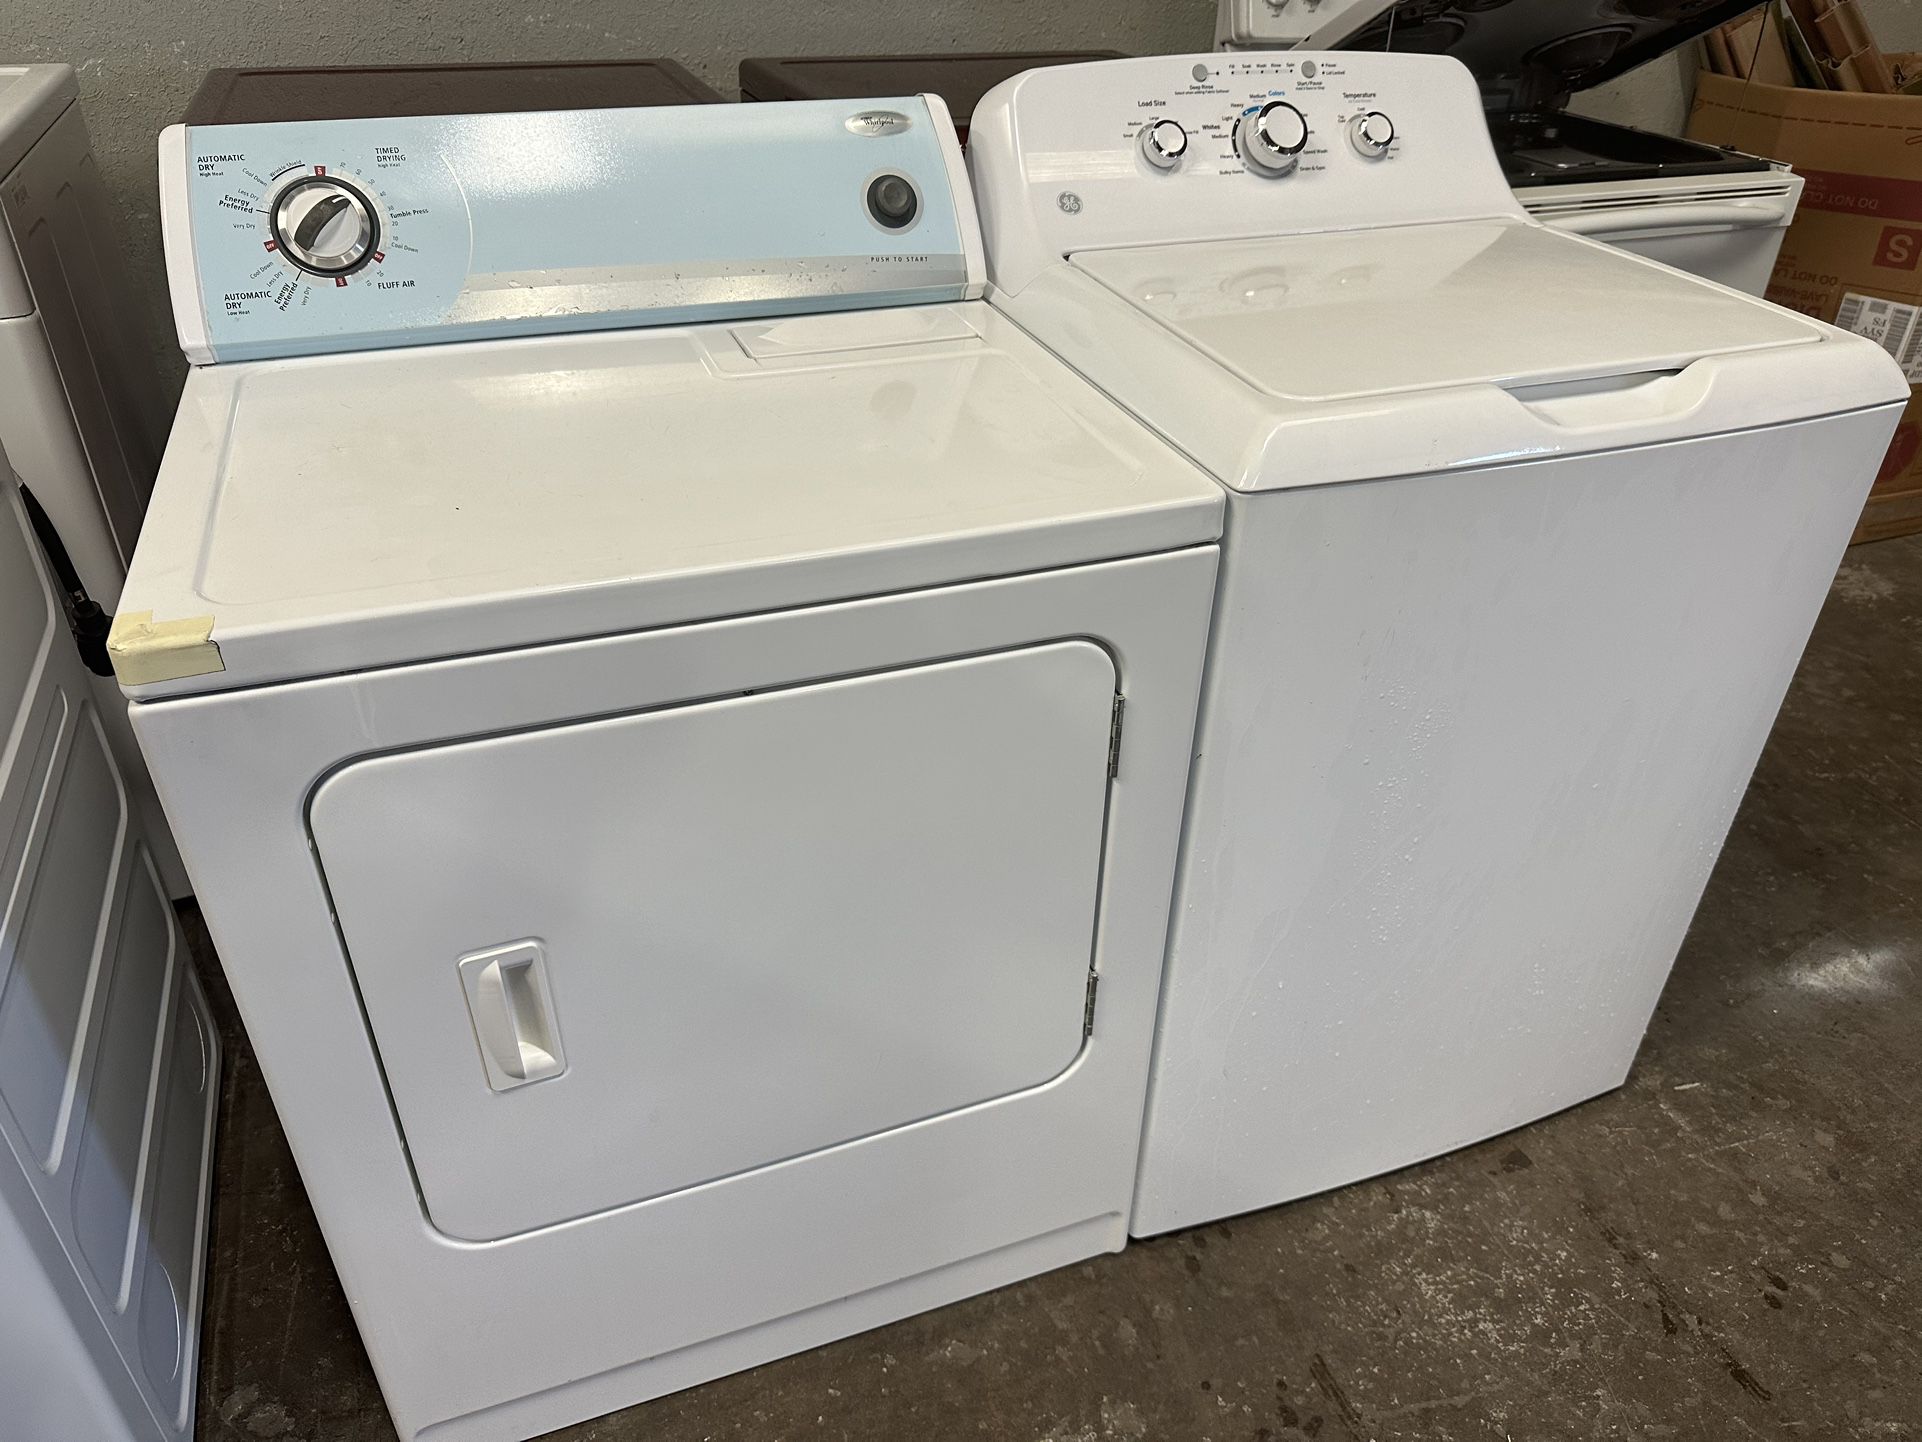 Cheap Shop/garage washer and electric dryer set can deliver  Both work great Washer is a little bit noisy in the spin cycle, but it doesn’t affect the